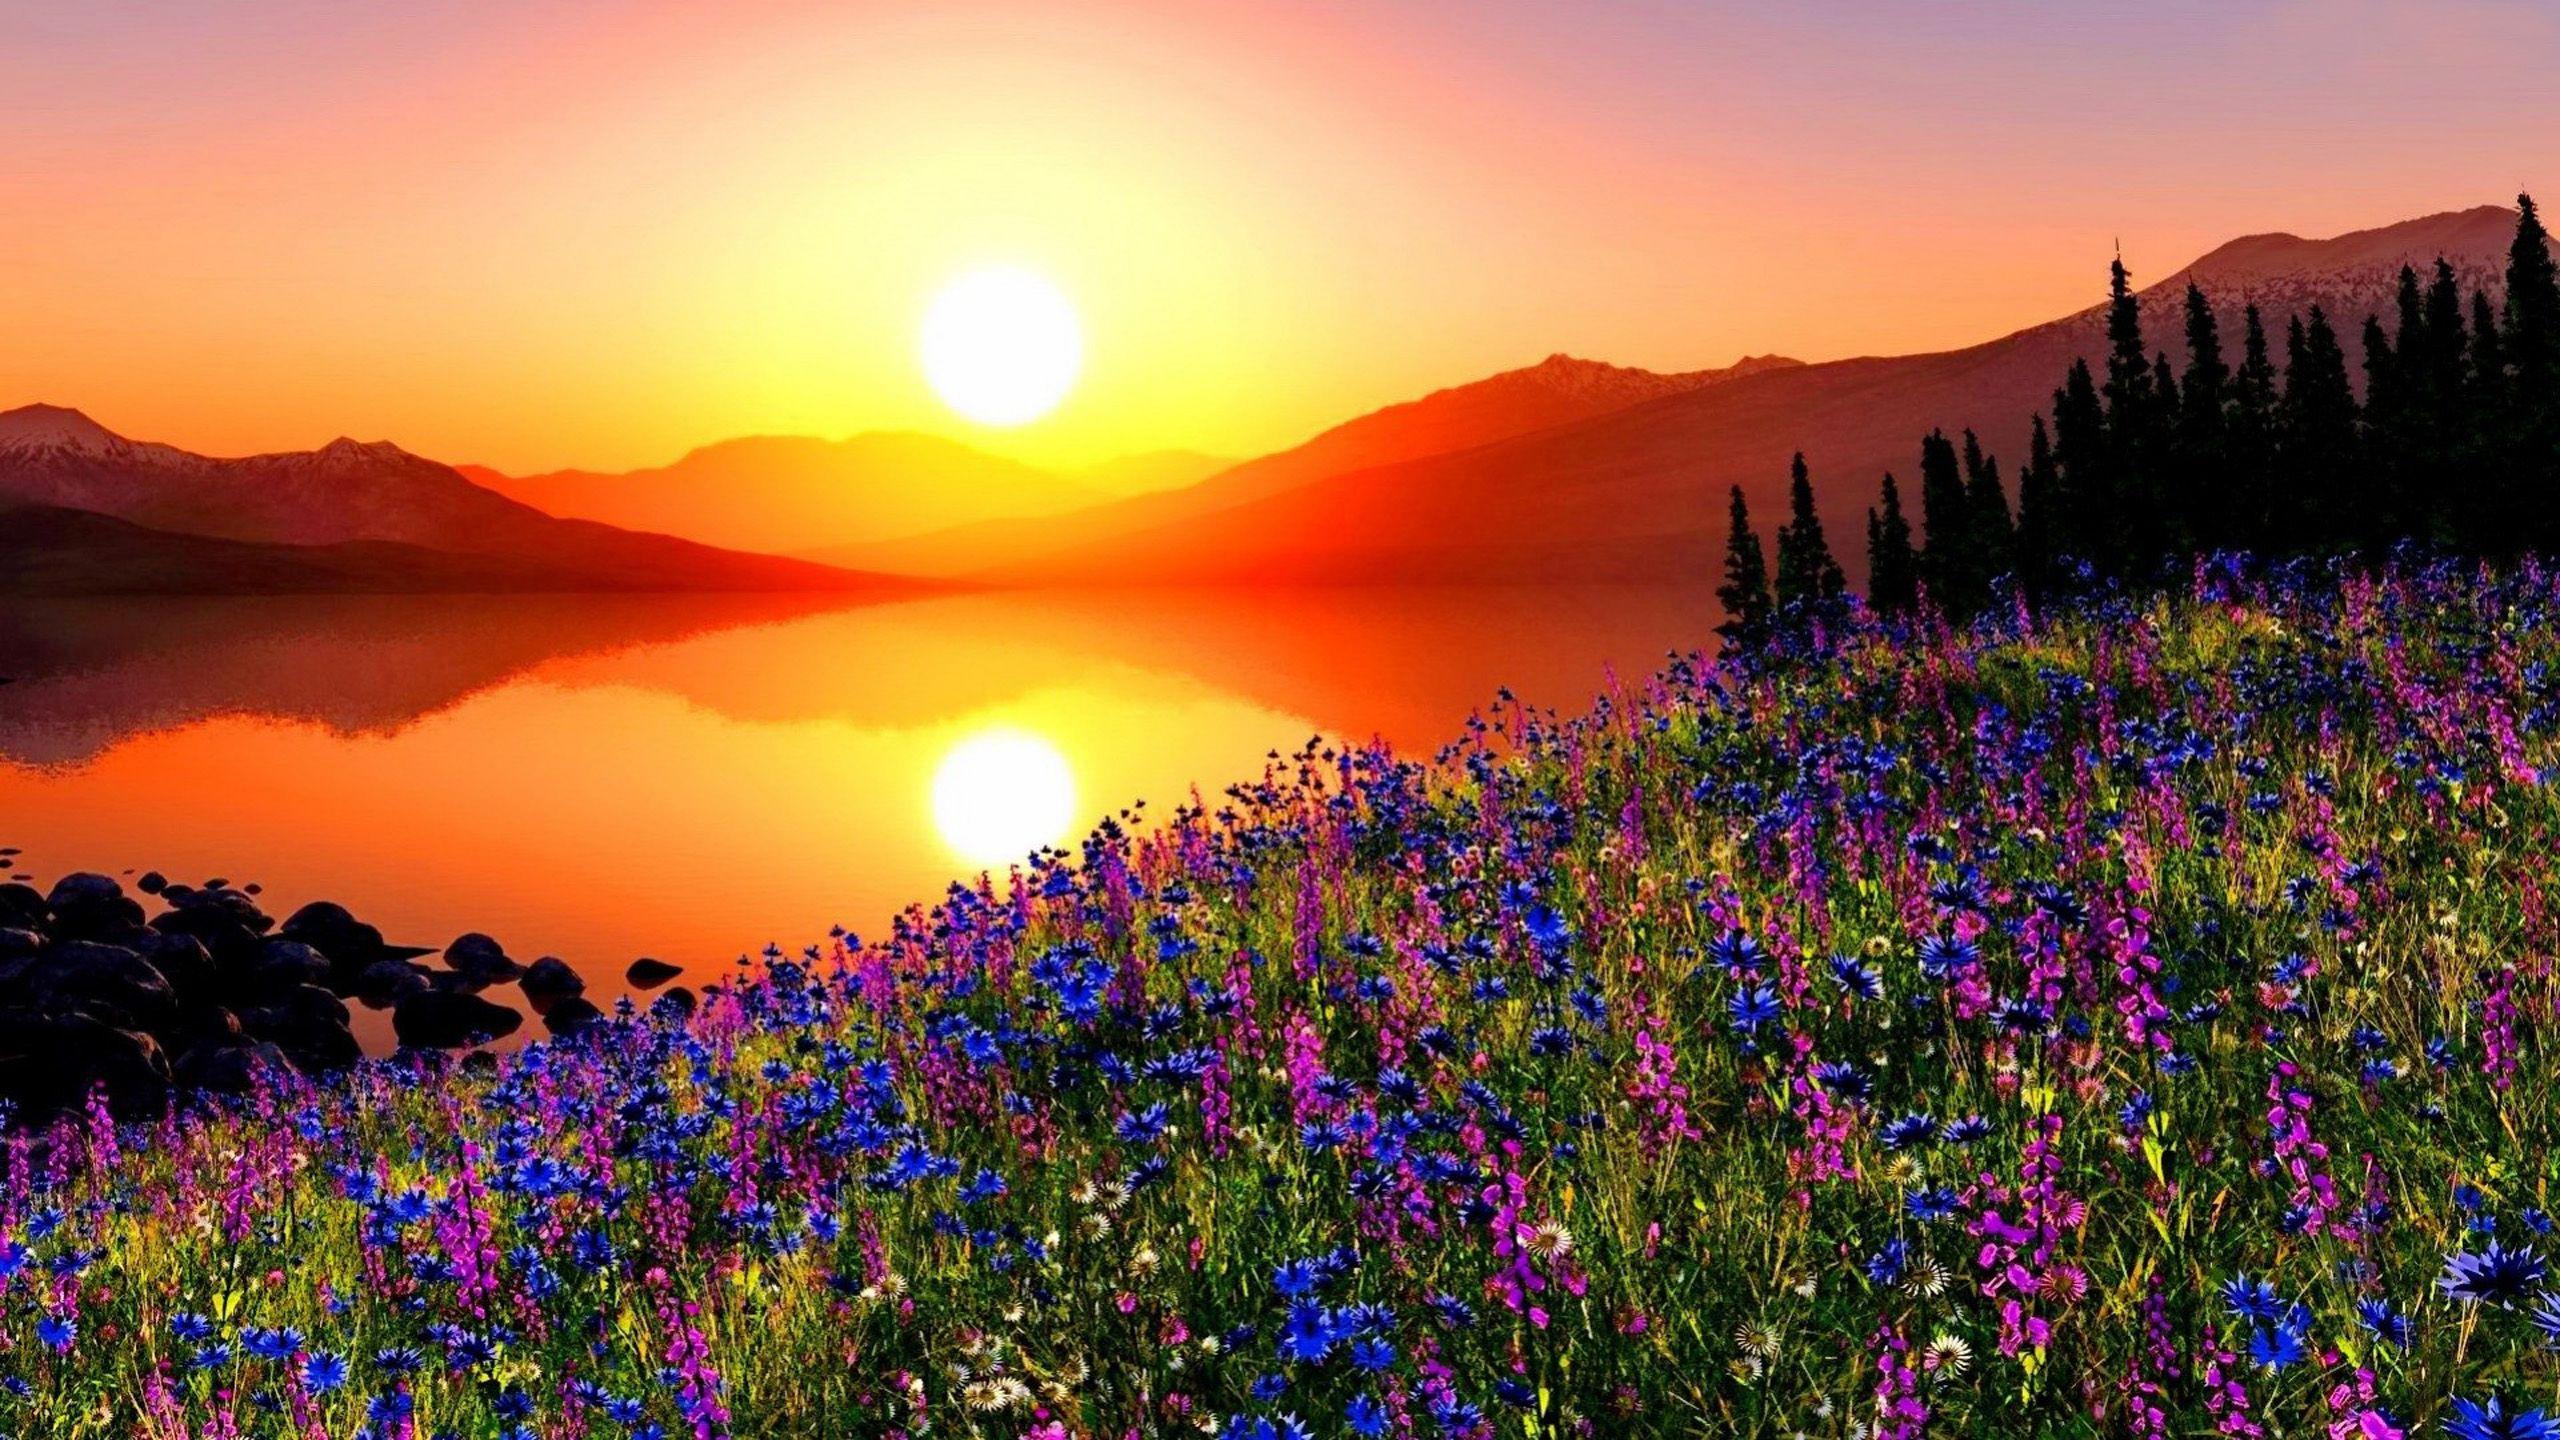 Sunset Mountain Meadow With Flowers, Pine Trees, Mountains